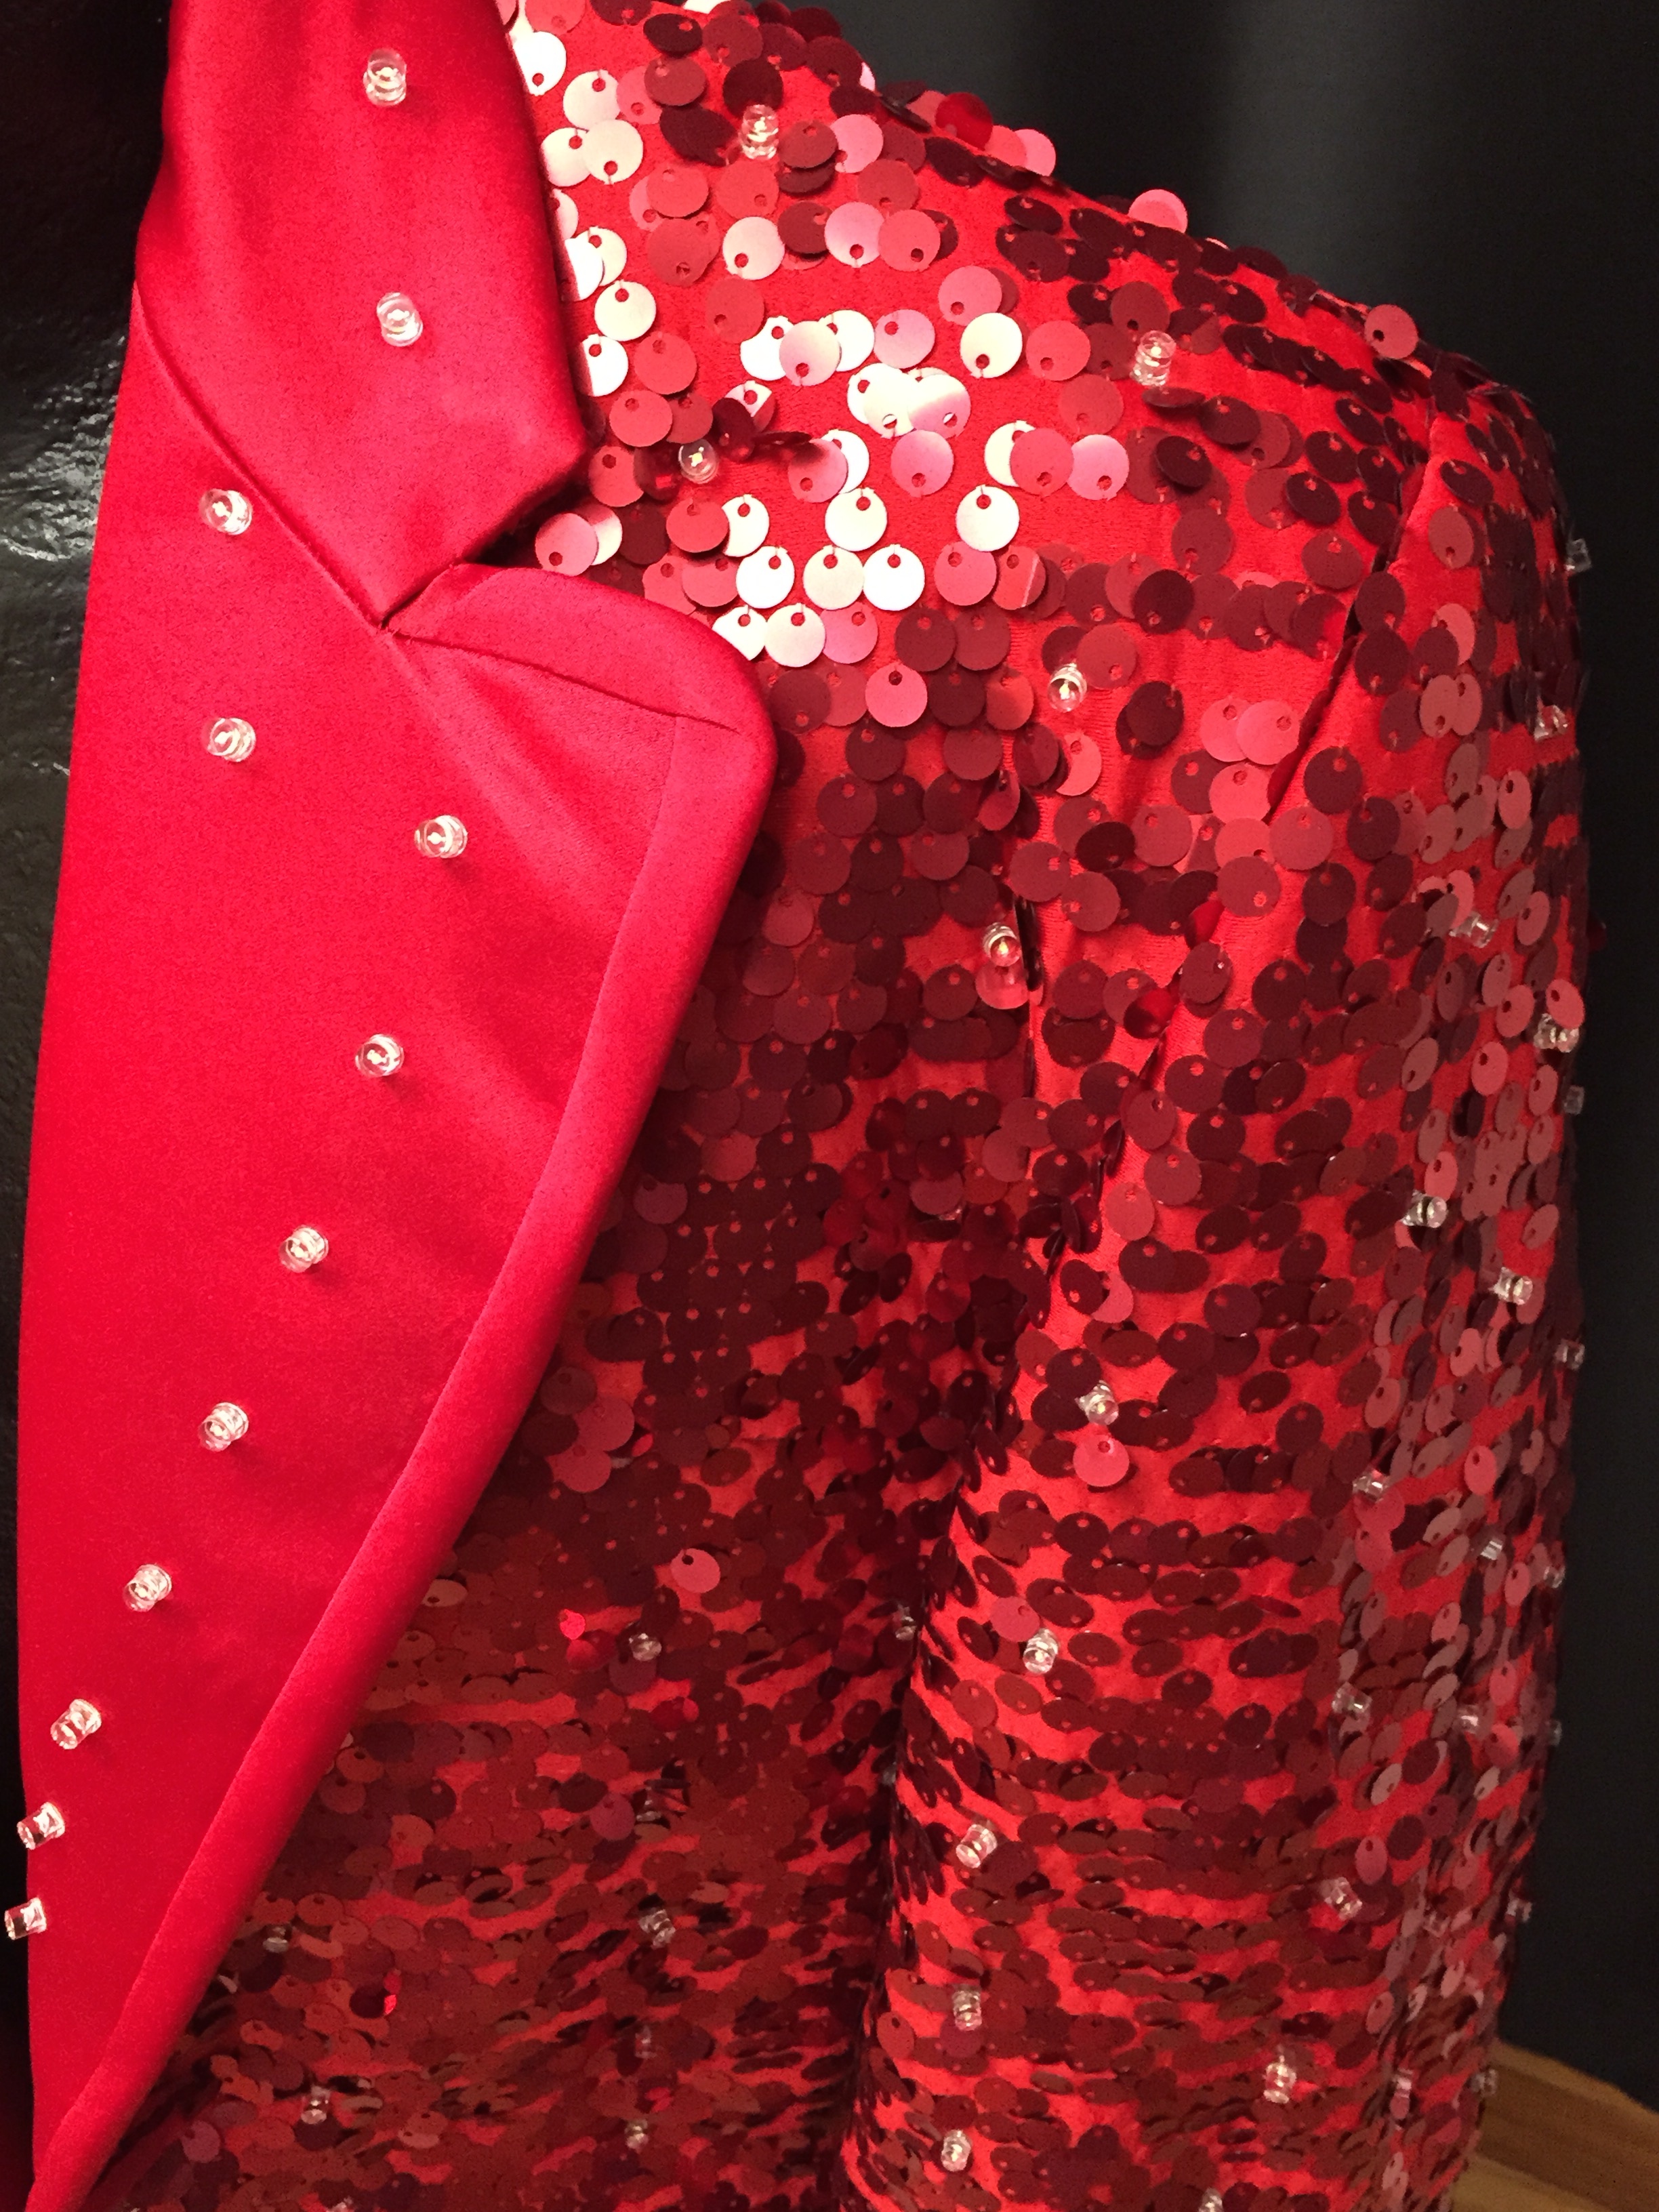 Red Sequined Jacket with White LEDs - Enlighted Designs